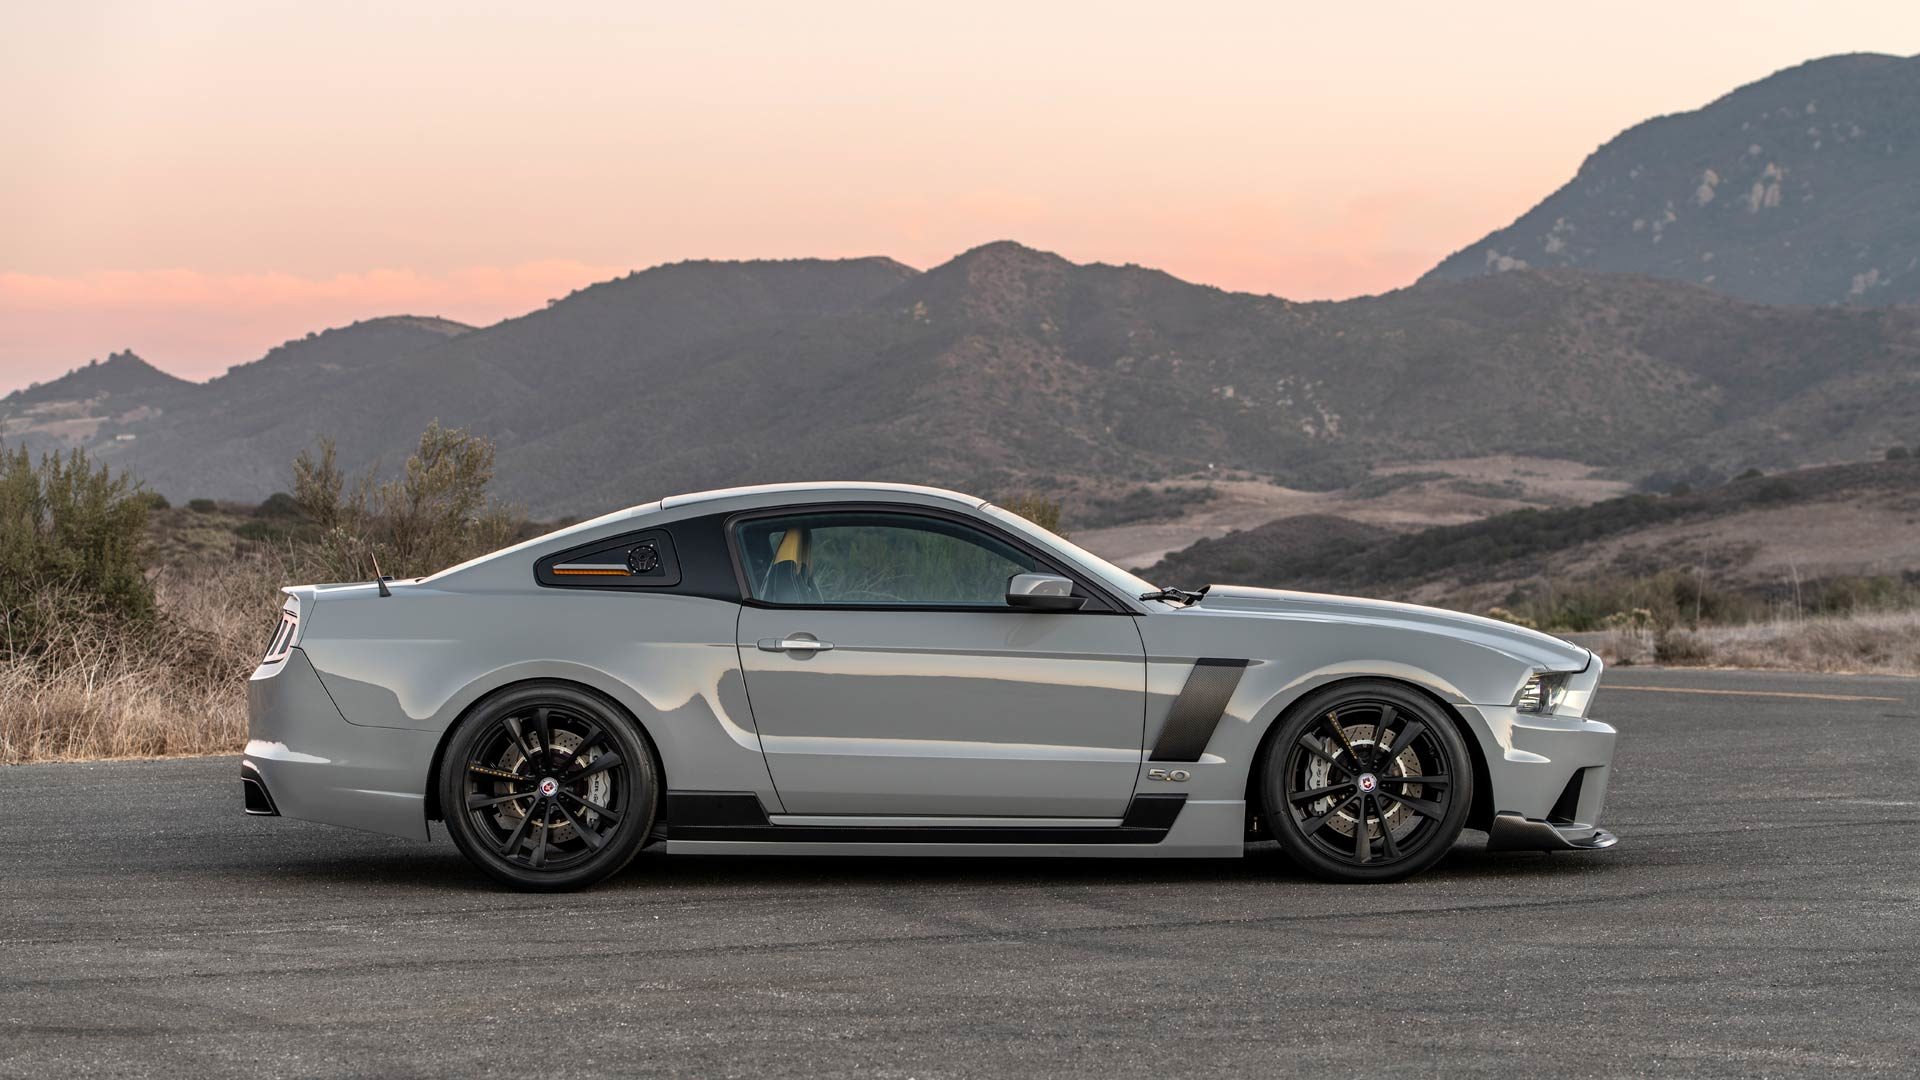 BaT Ringbrothers Switchback Mustang